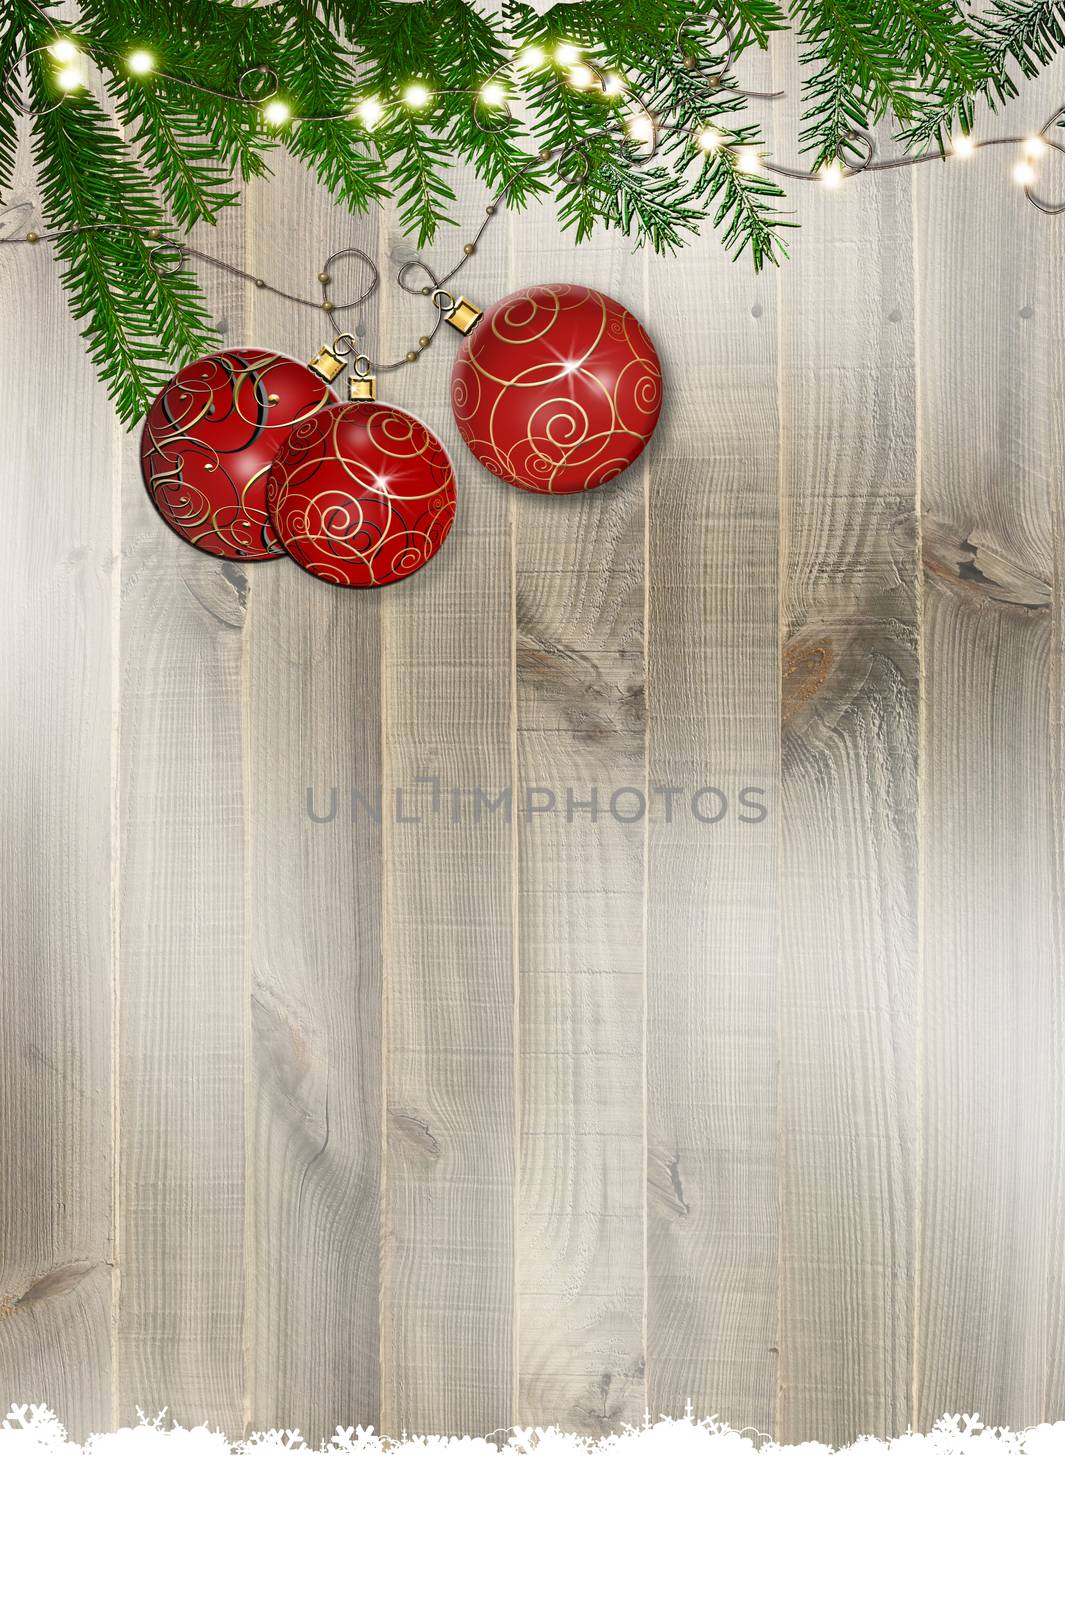 Christmas realistic red decoration with lights on wooden background. Place for text, vertical, mockup. Flat lay. 3D illustration